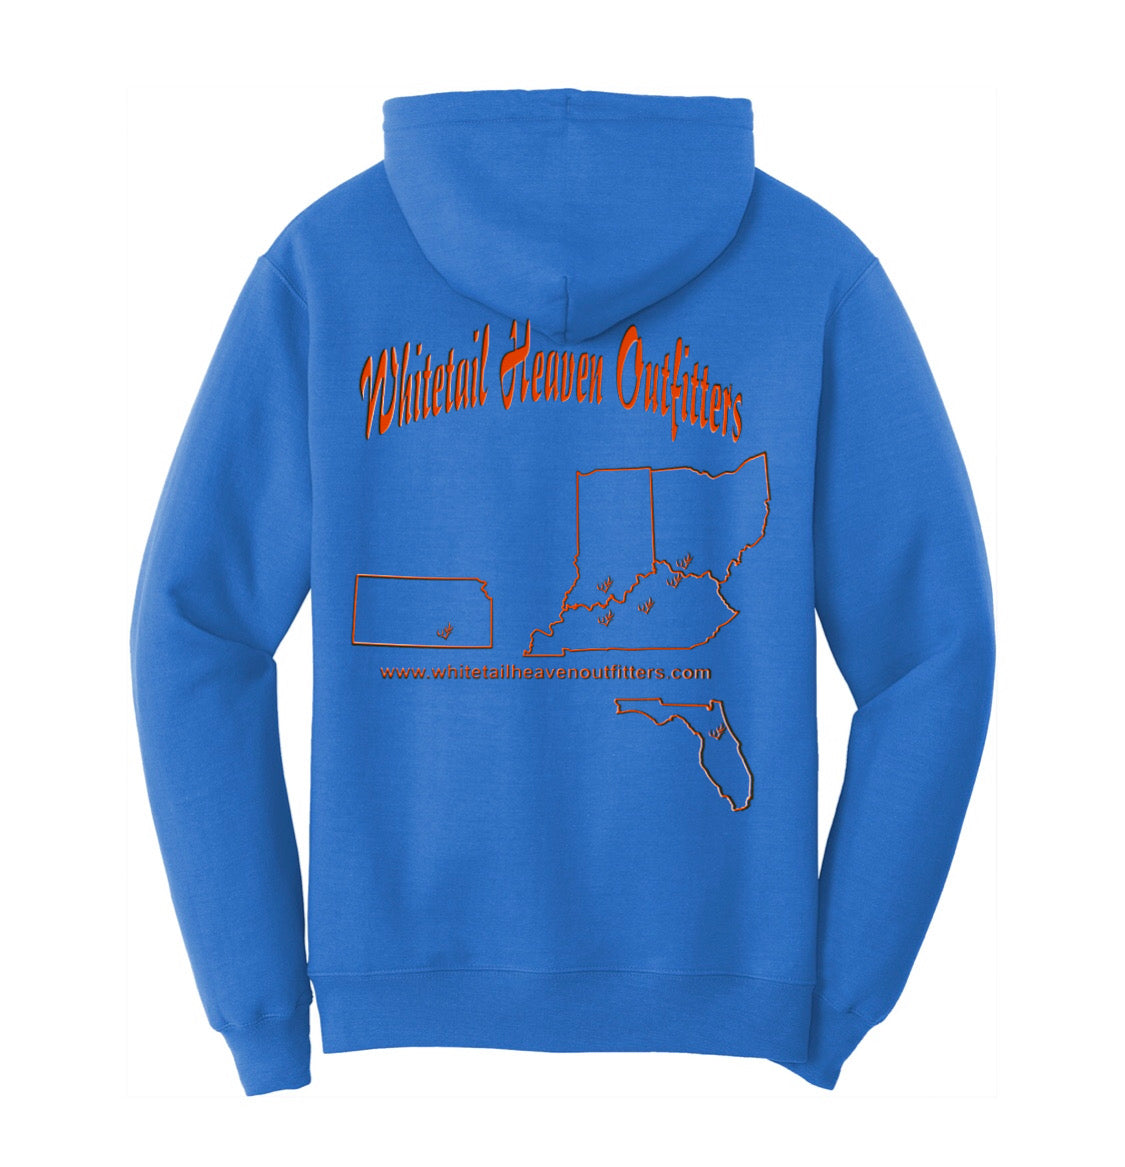 WHO HOODIE LIMITED EDITION FLORIDA PROUD PULLOVER SWEATSHIRT